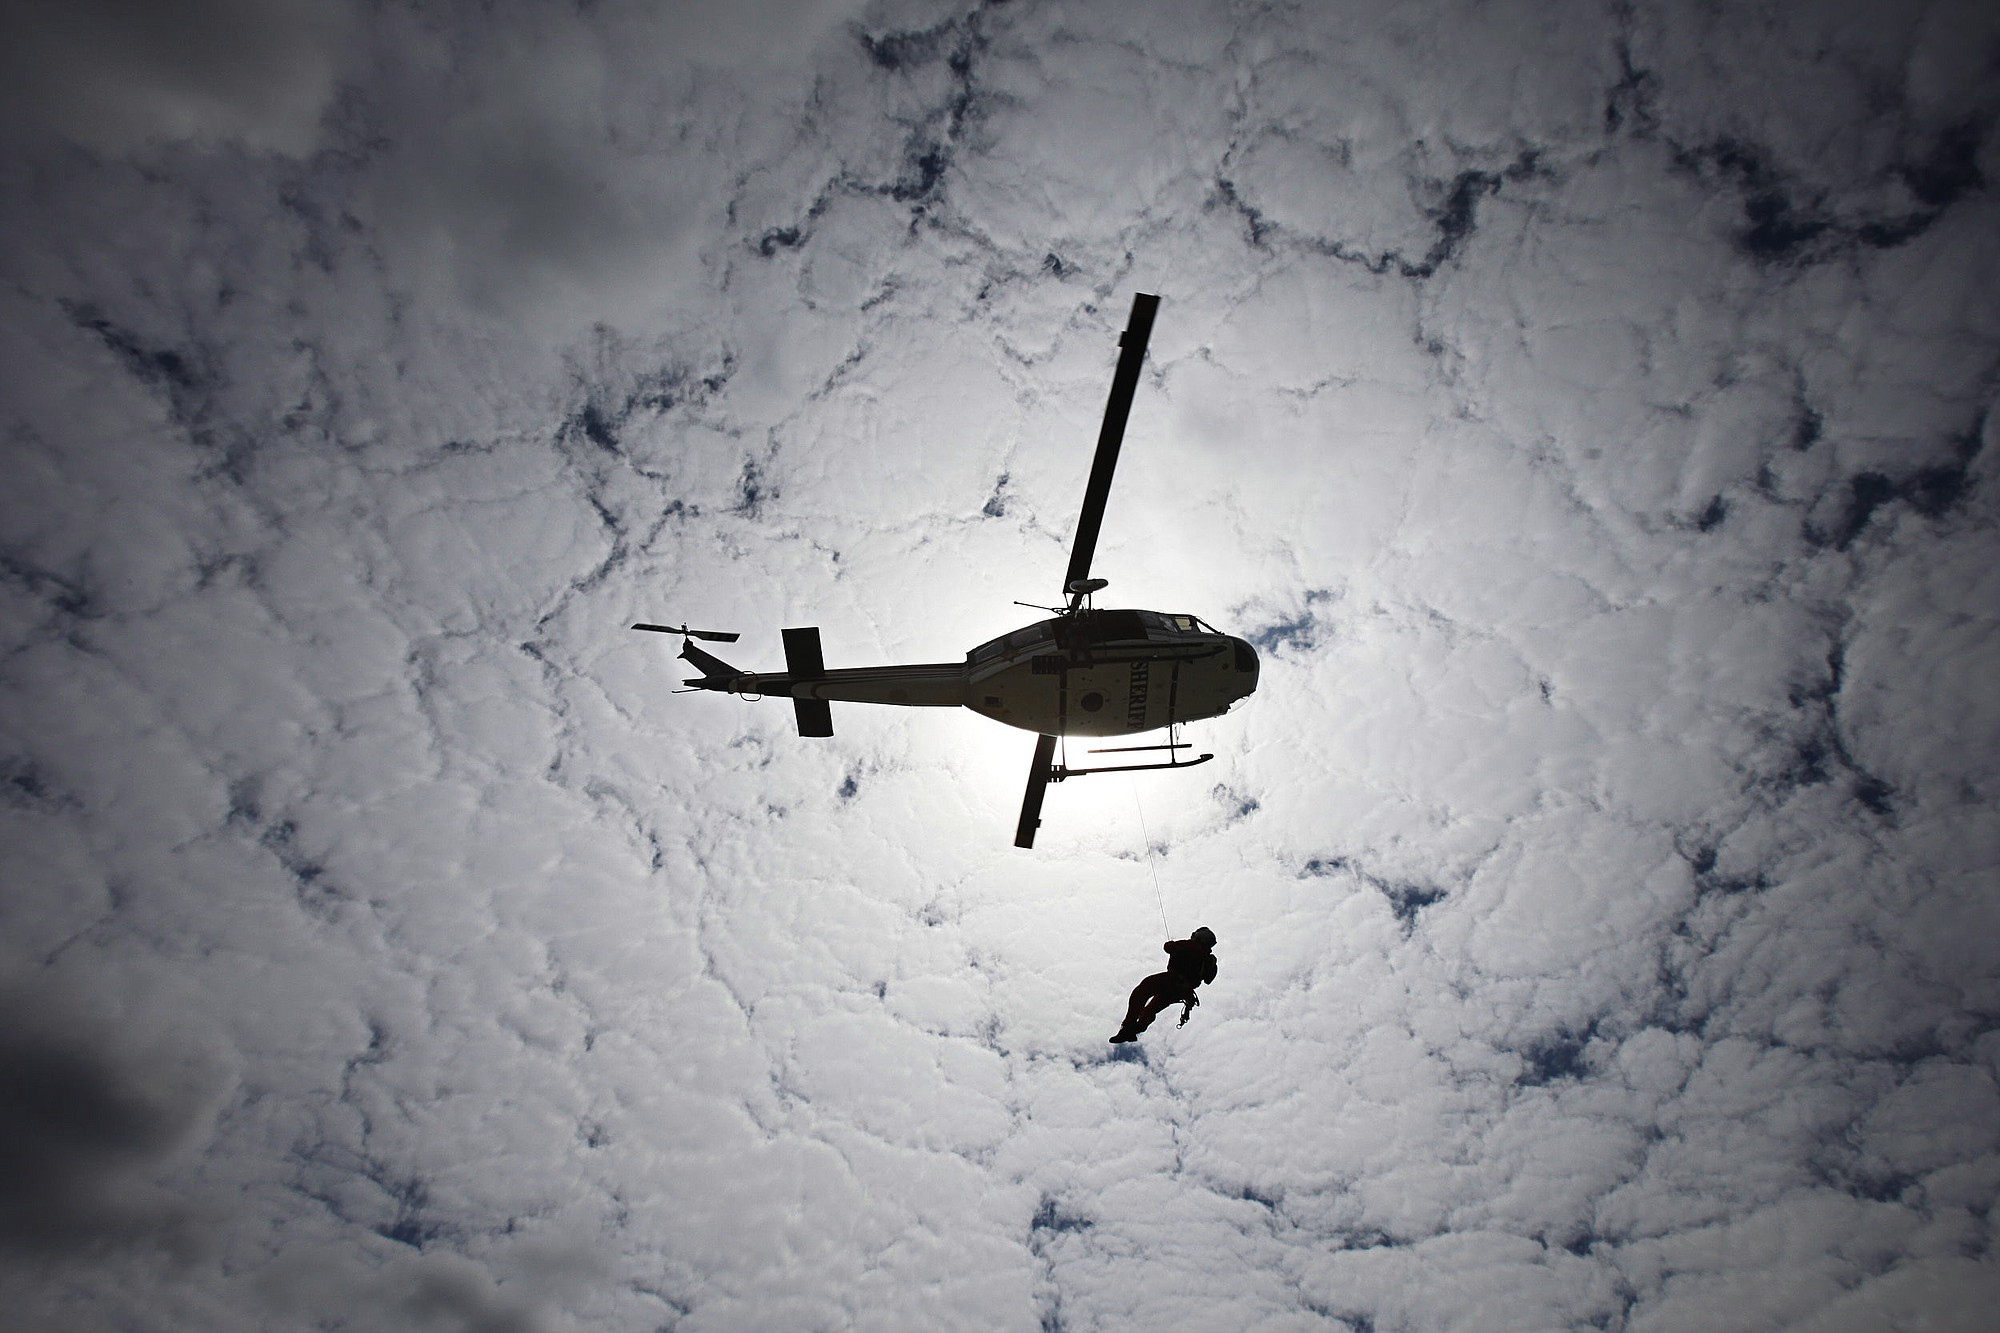 A Search and Rescue volunteer glides down to the ground on a line from the Sheriff Department's Huey helicopter with cloud cover above as part of an August 2012 training exercise at Taylor's Landing Search and Rescue Facility in Snohomish.